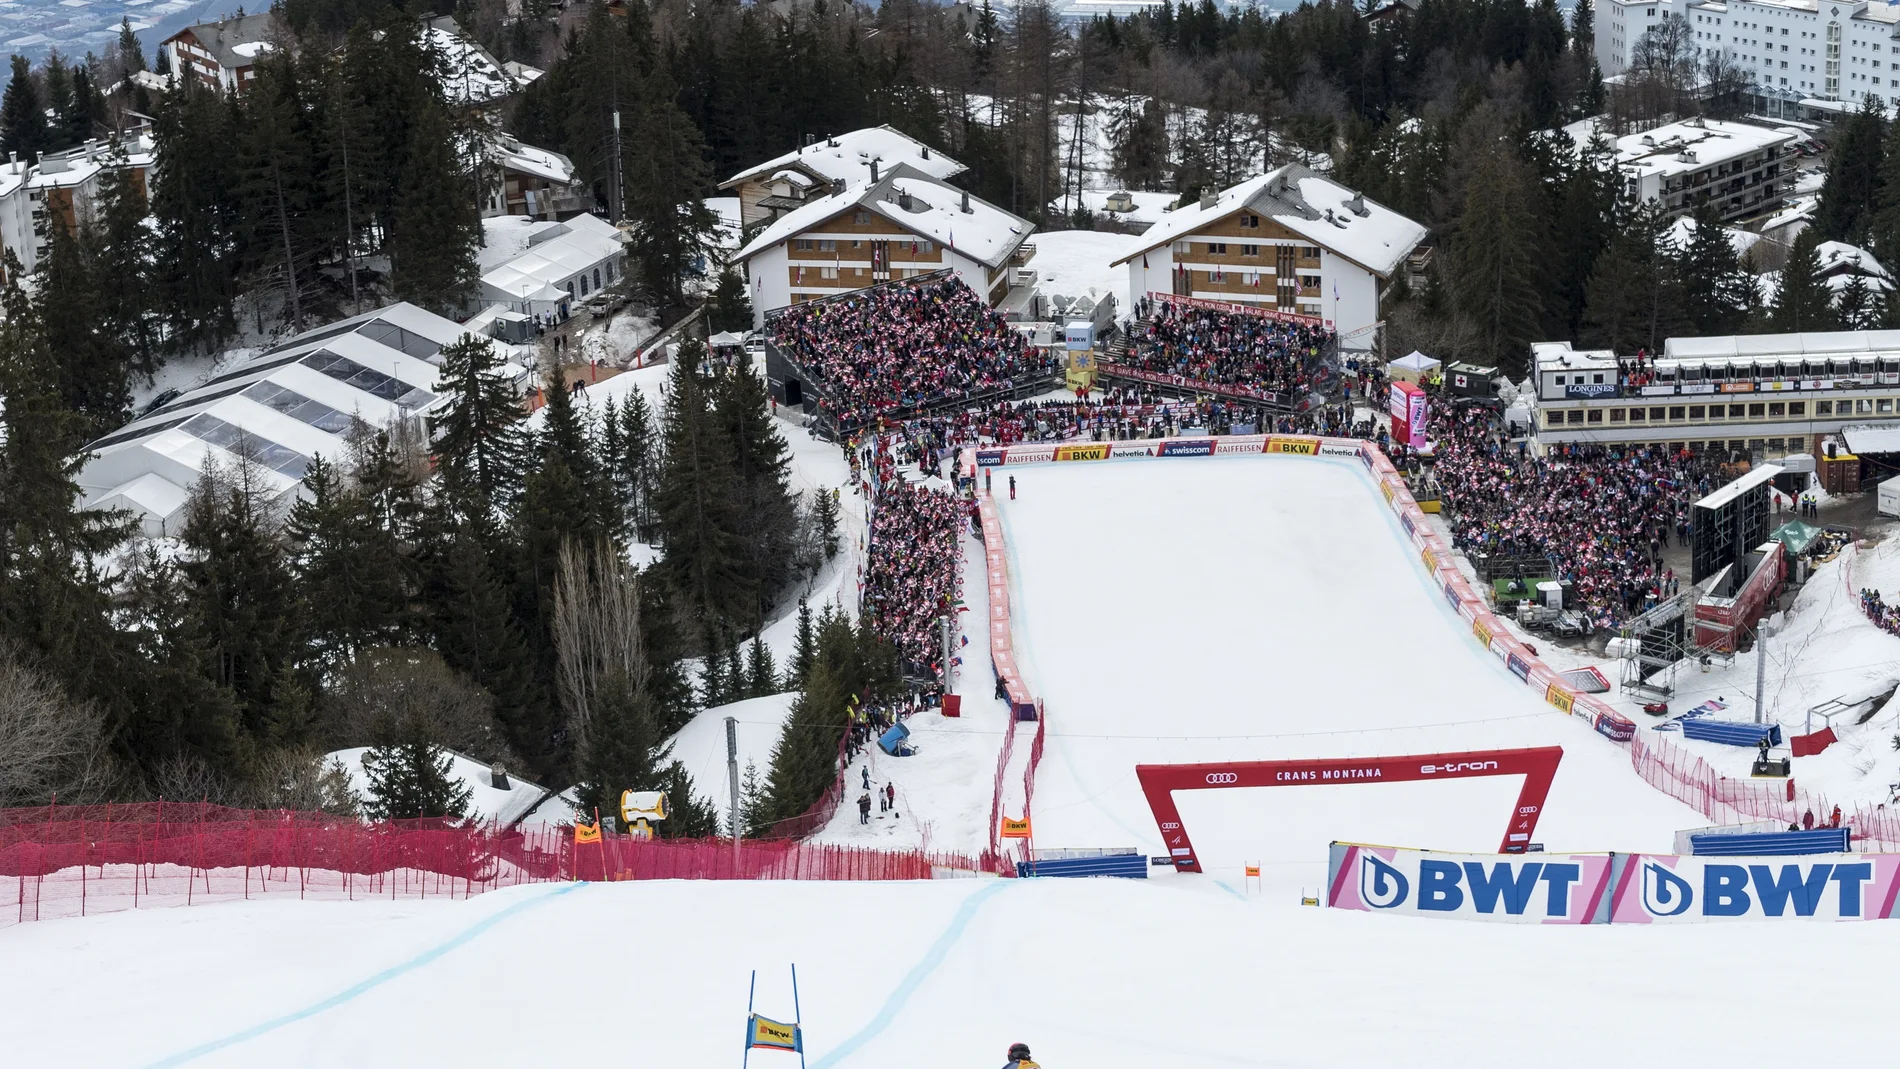 FIS Alpine Skiing World Cup in Crans-Montana